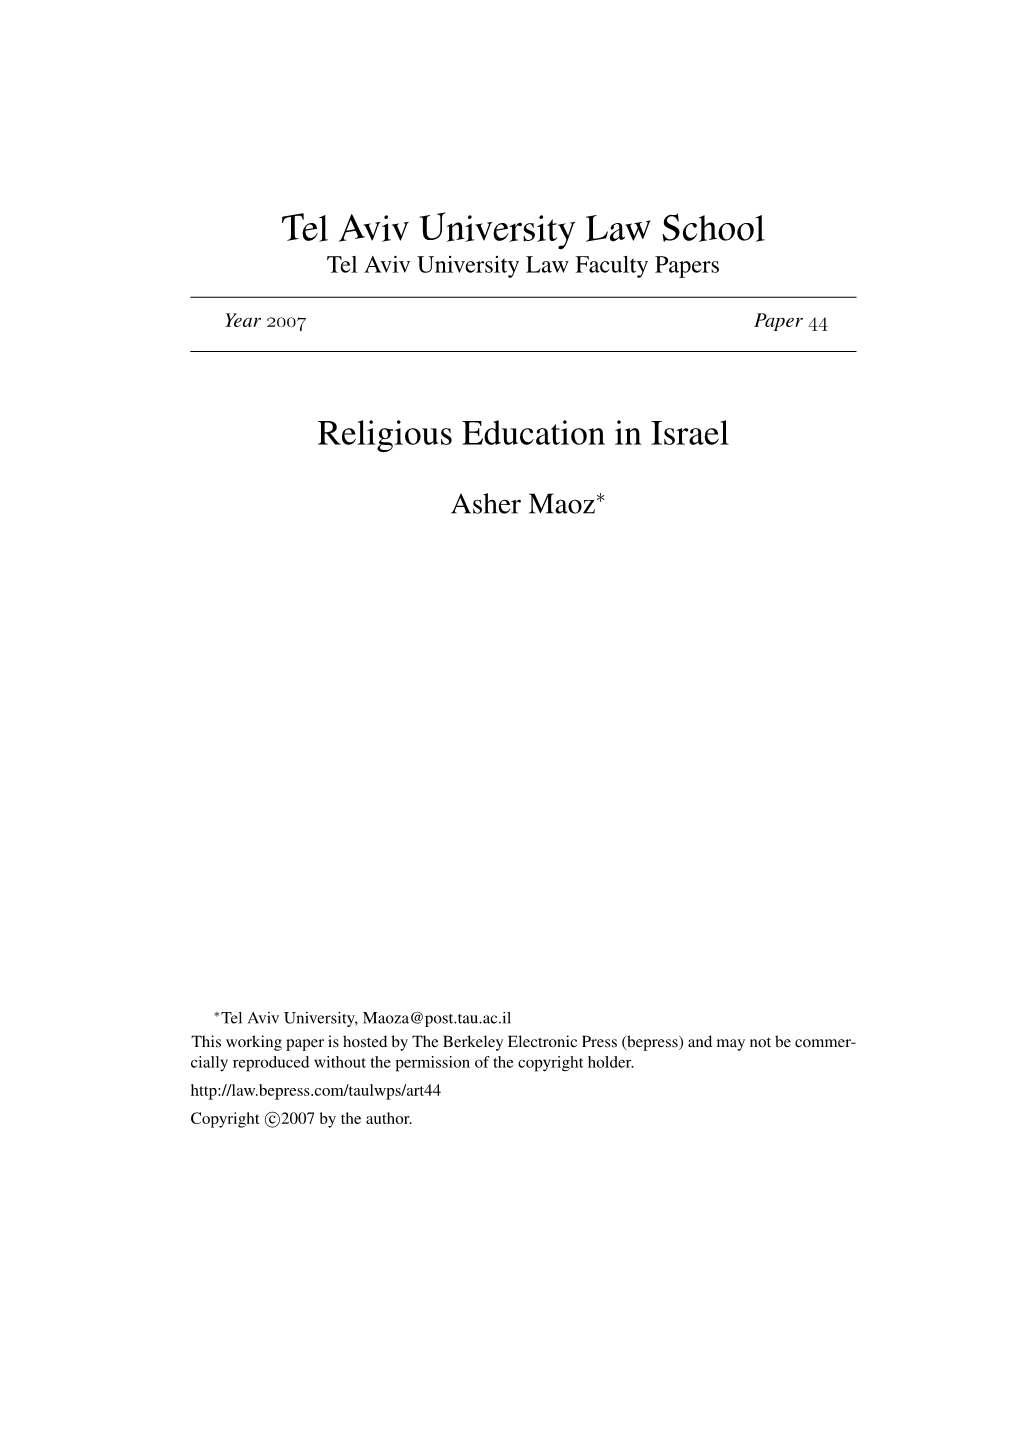 Religious Education in Israel